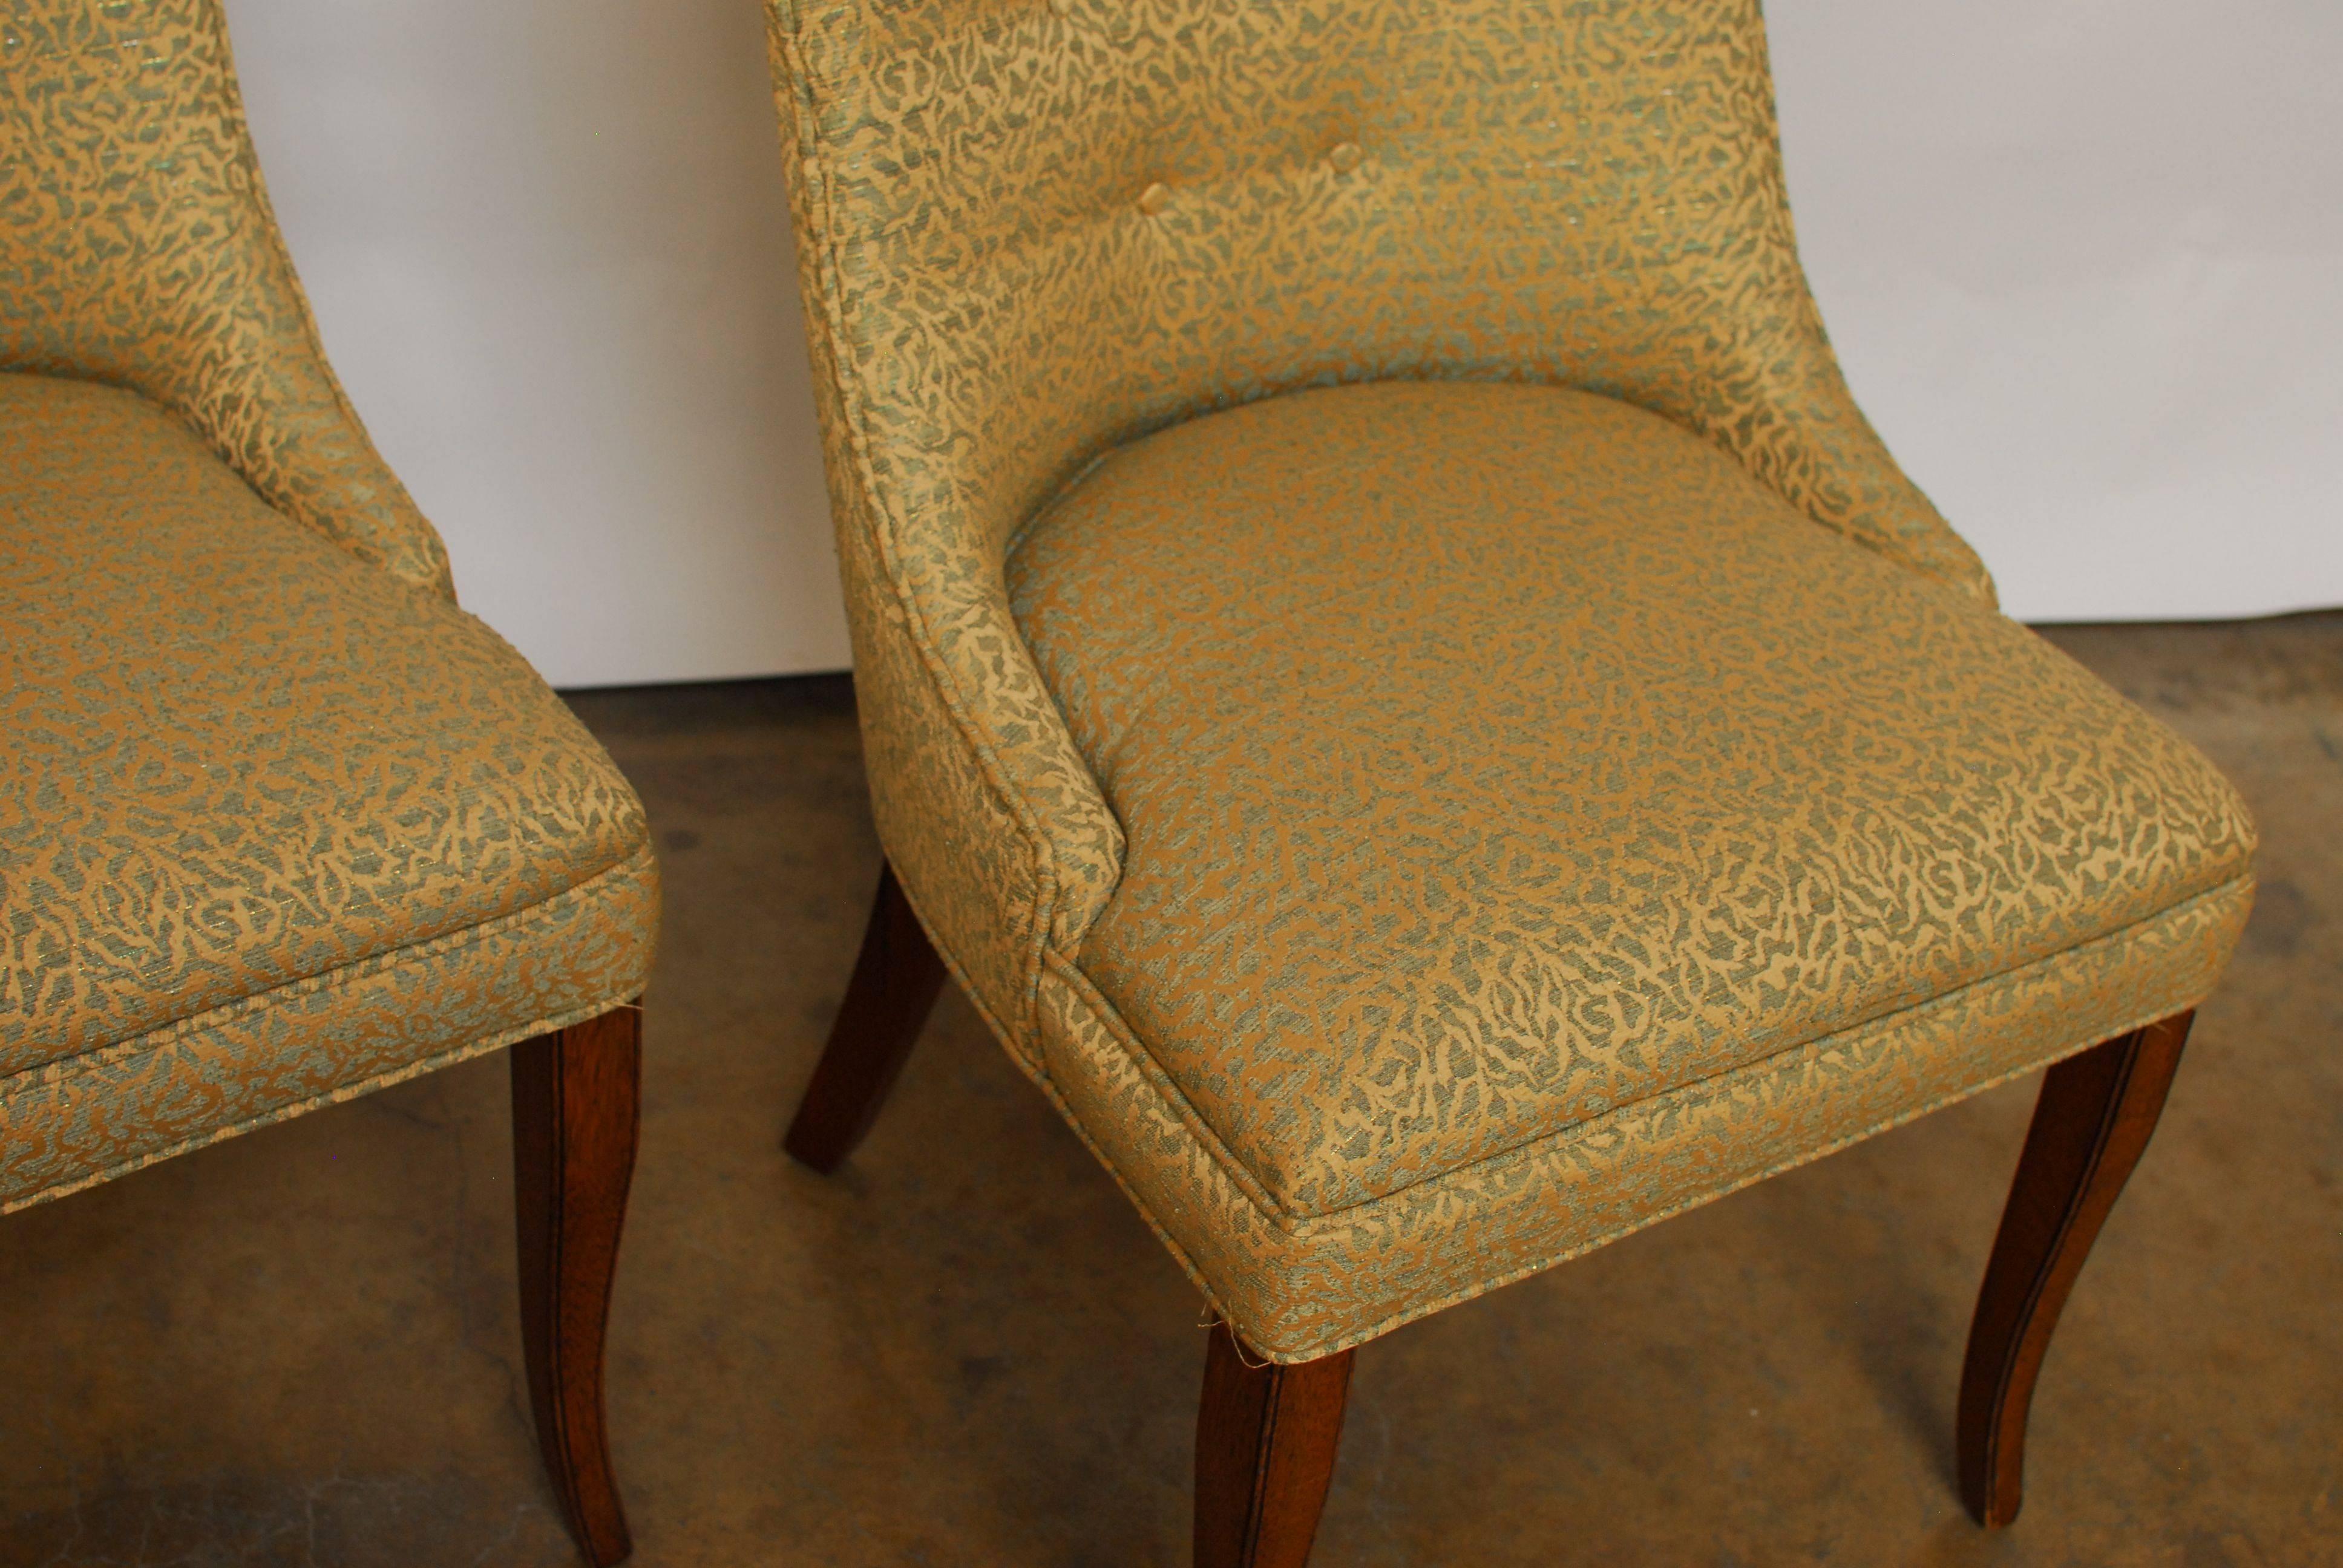 Chic pair of W.J. Sloane Mid-Century scoop back chairs featuring an animal print style pattern in a turquoise metallic and gold fabric. These chairs were made in 1956 with mahogany legs and tufted scoop back.
